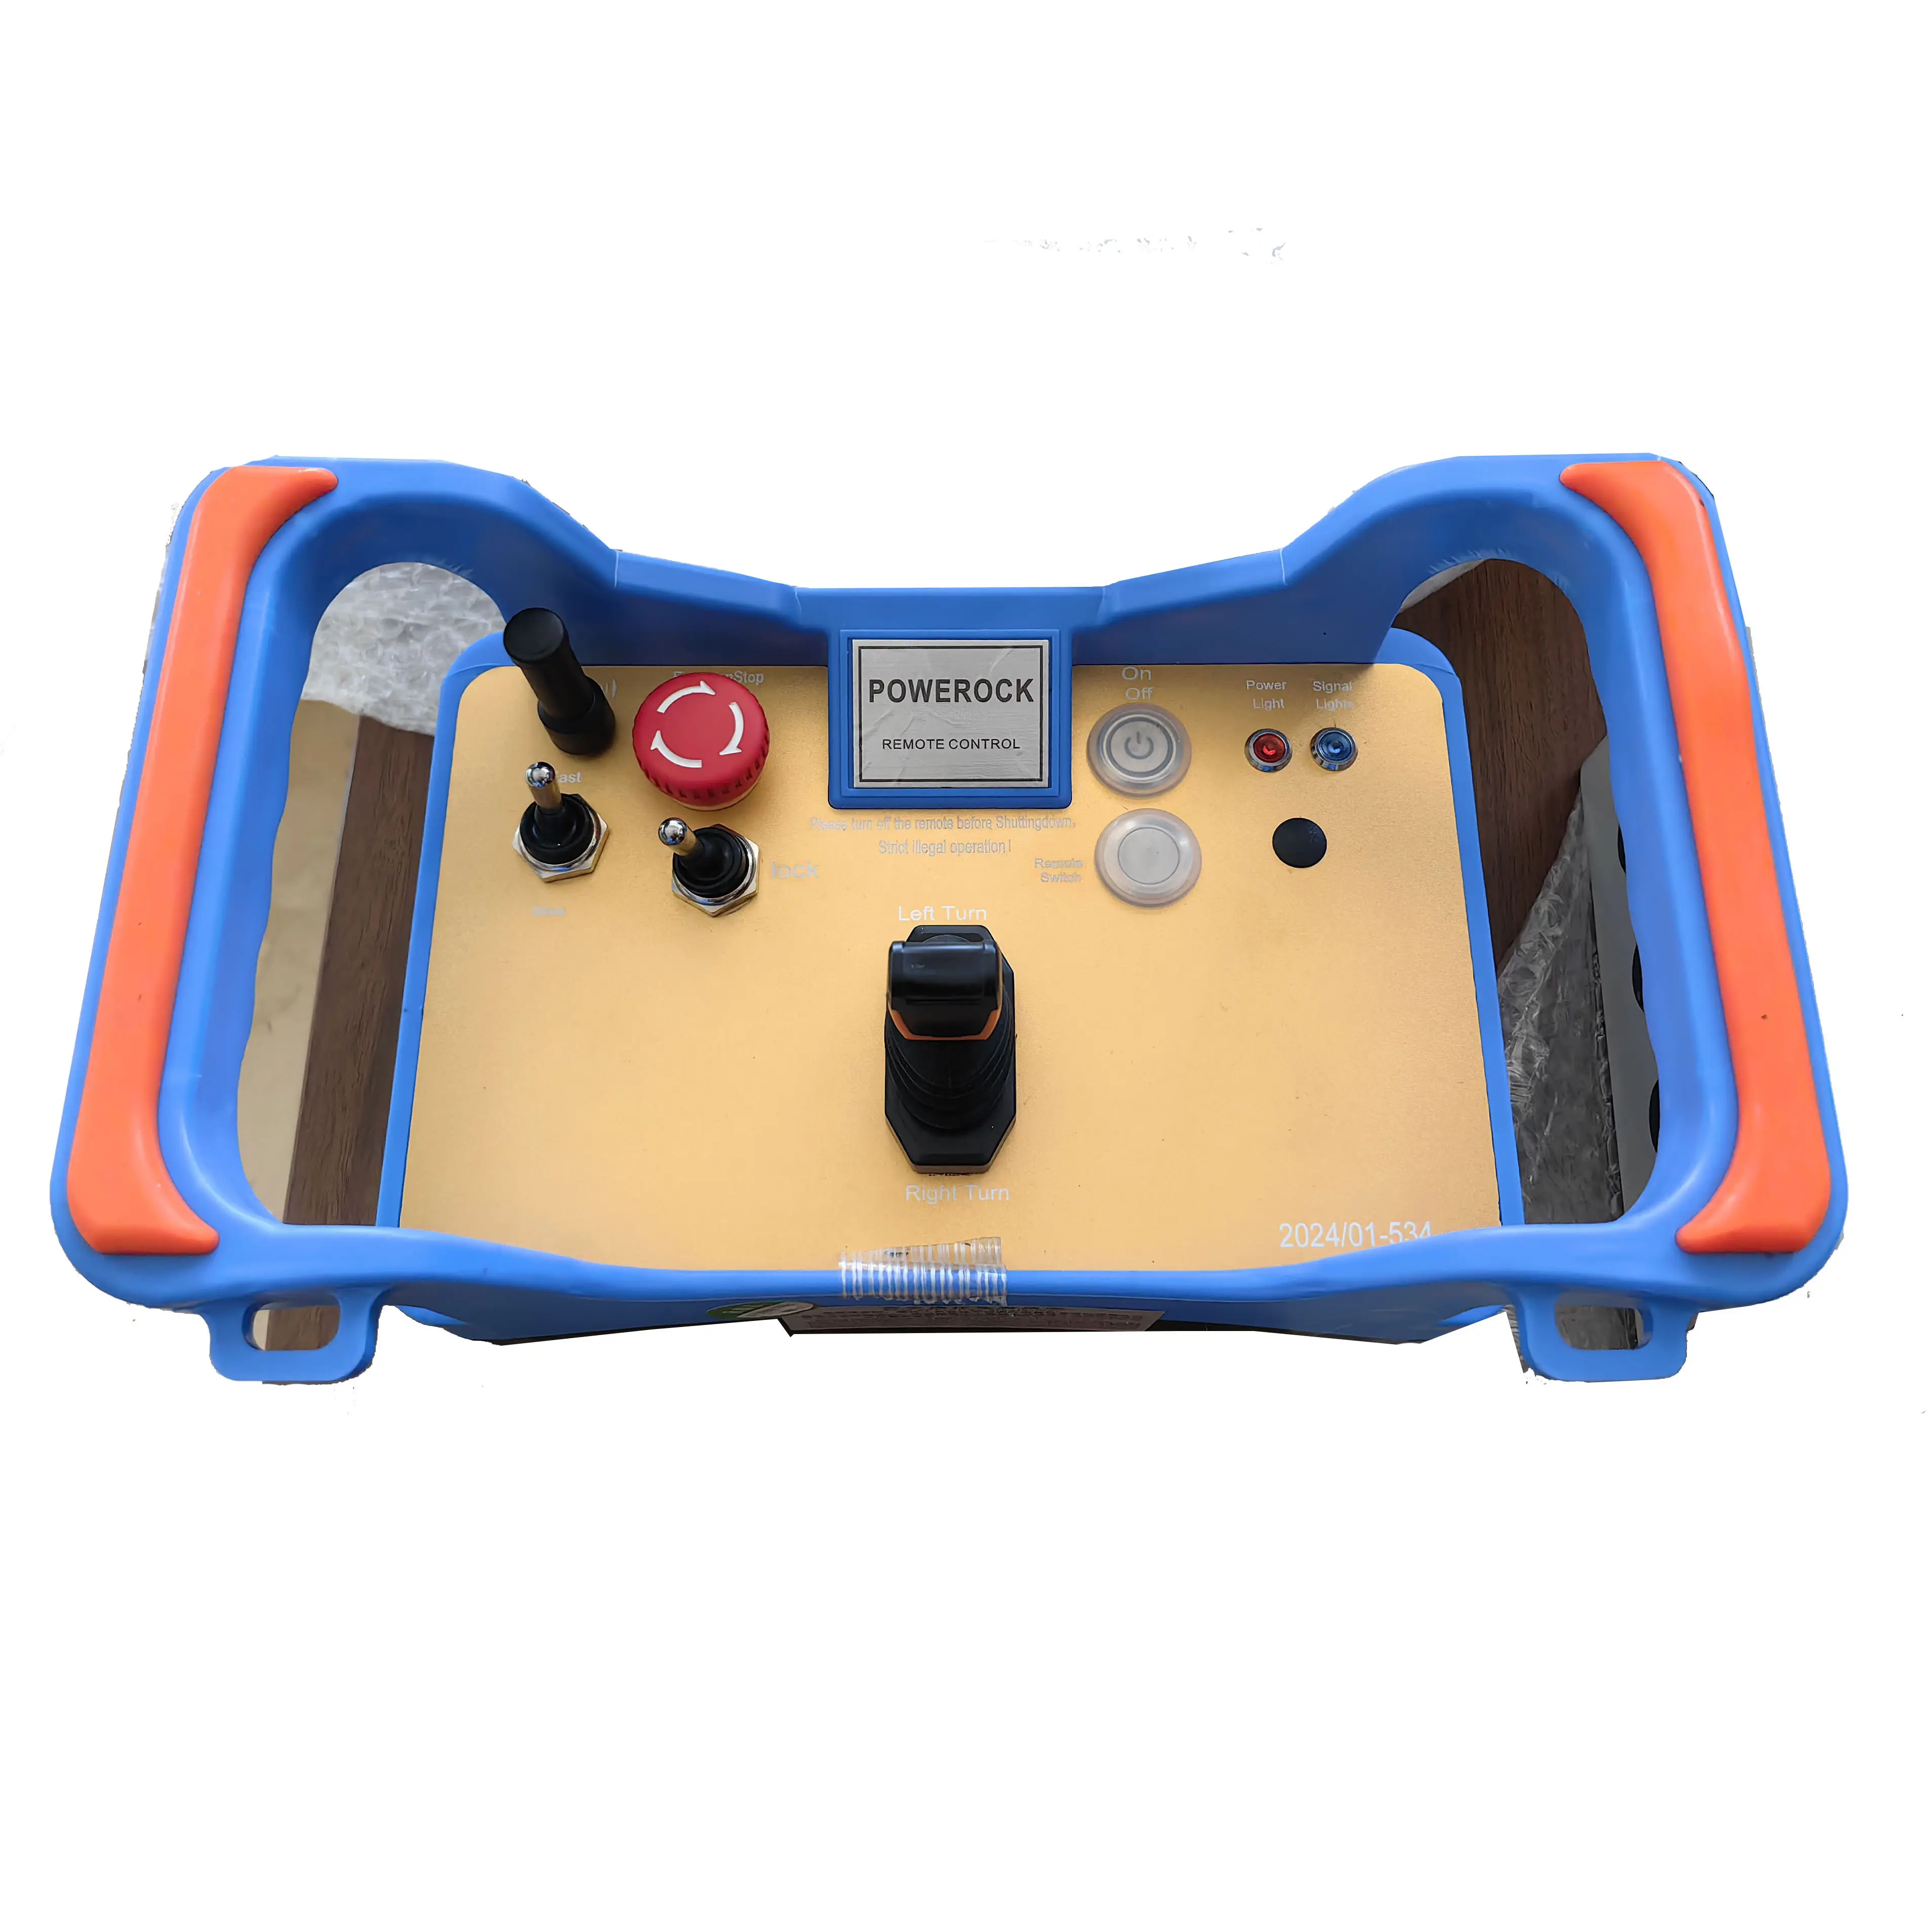 YANTAI BAICAI MACHINERY Nice Industrial Remote Control remote control Wireless with 1-8 buttons ways